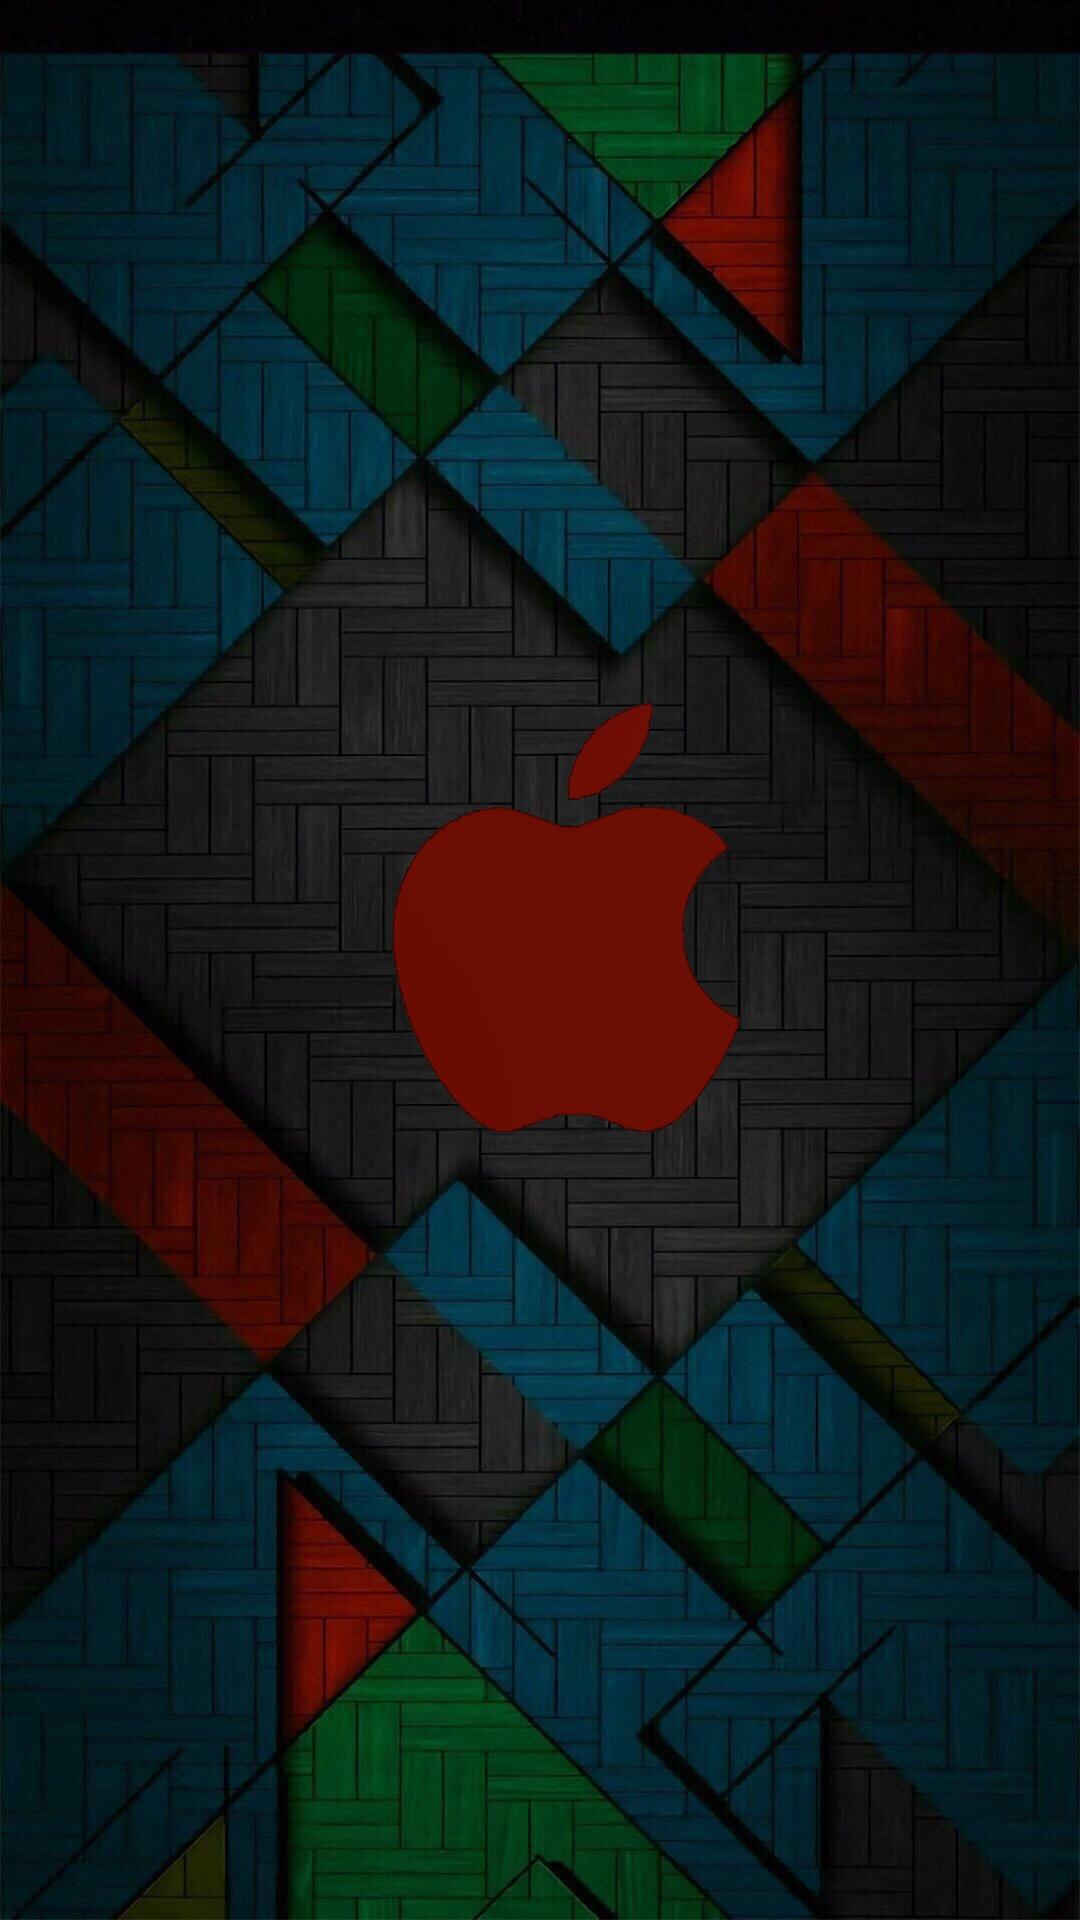 1080 x 1920 · jpeg - Apple Wallpaper..post your creative Apple wallpaper - Page 61 - iPhone ...